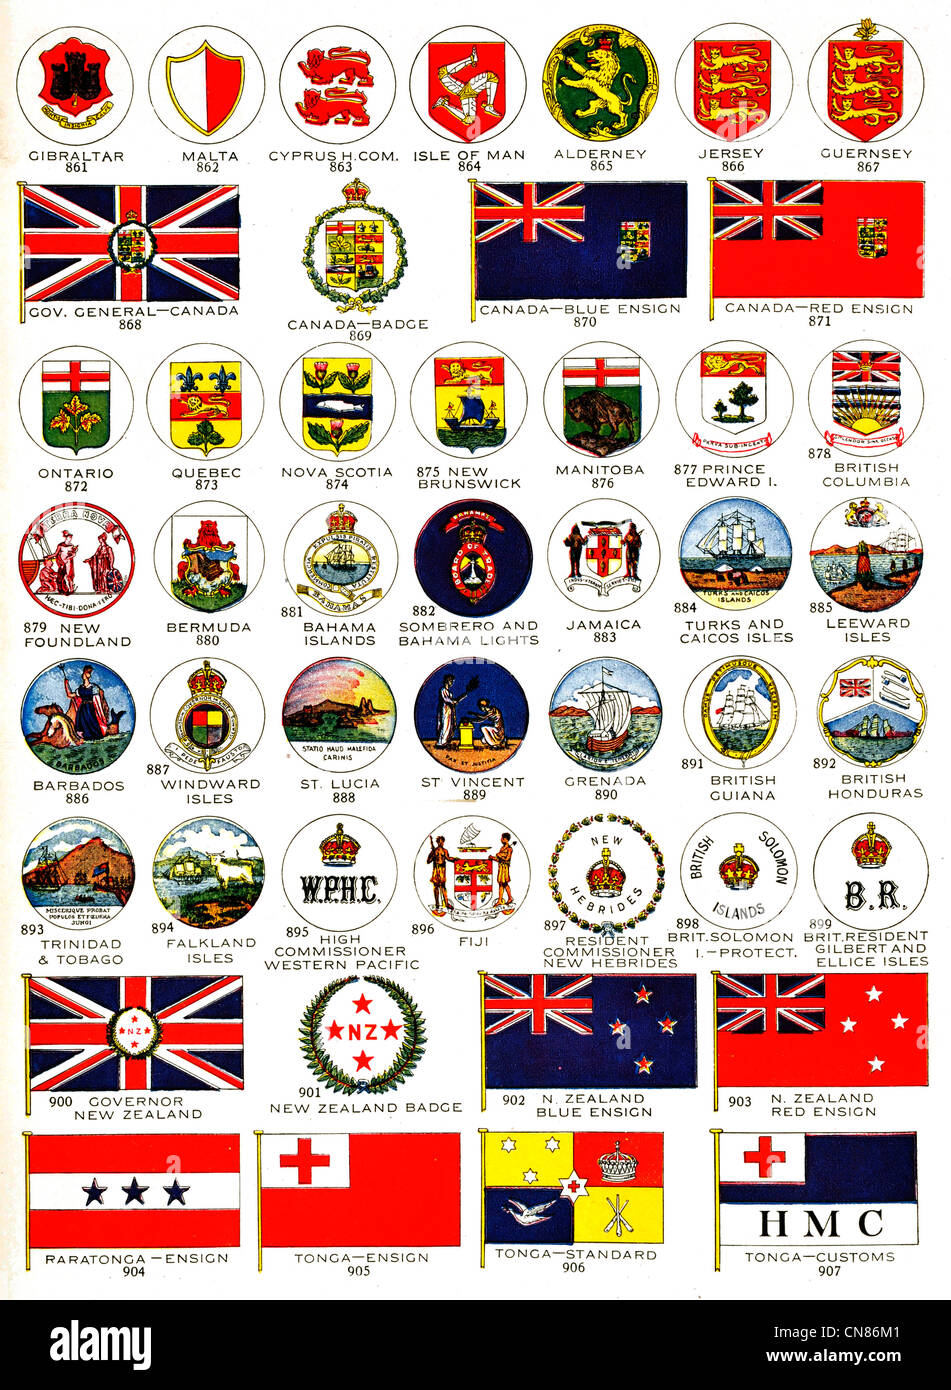 First published 1917 Flag Flags Standard Gibraltar Malta Cyprus isle of Man Alderney Jersey Guernsey General Canada Badge Stock Photo